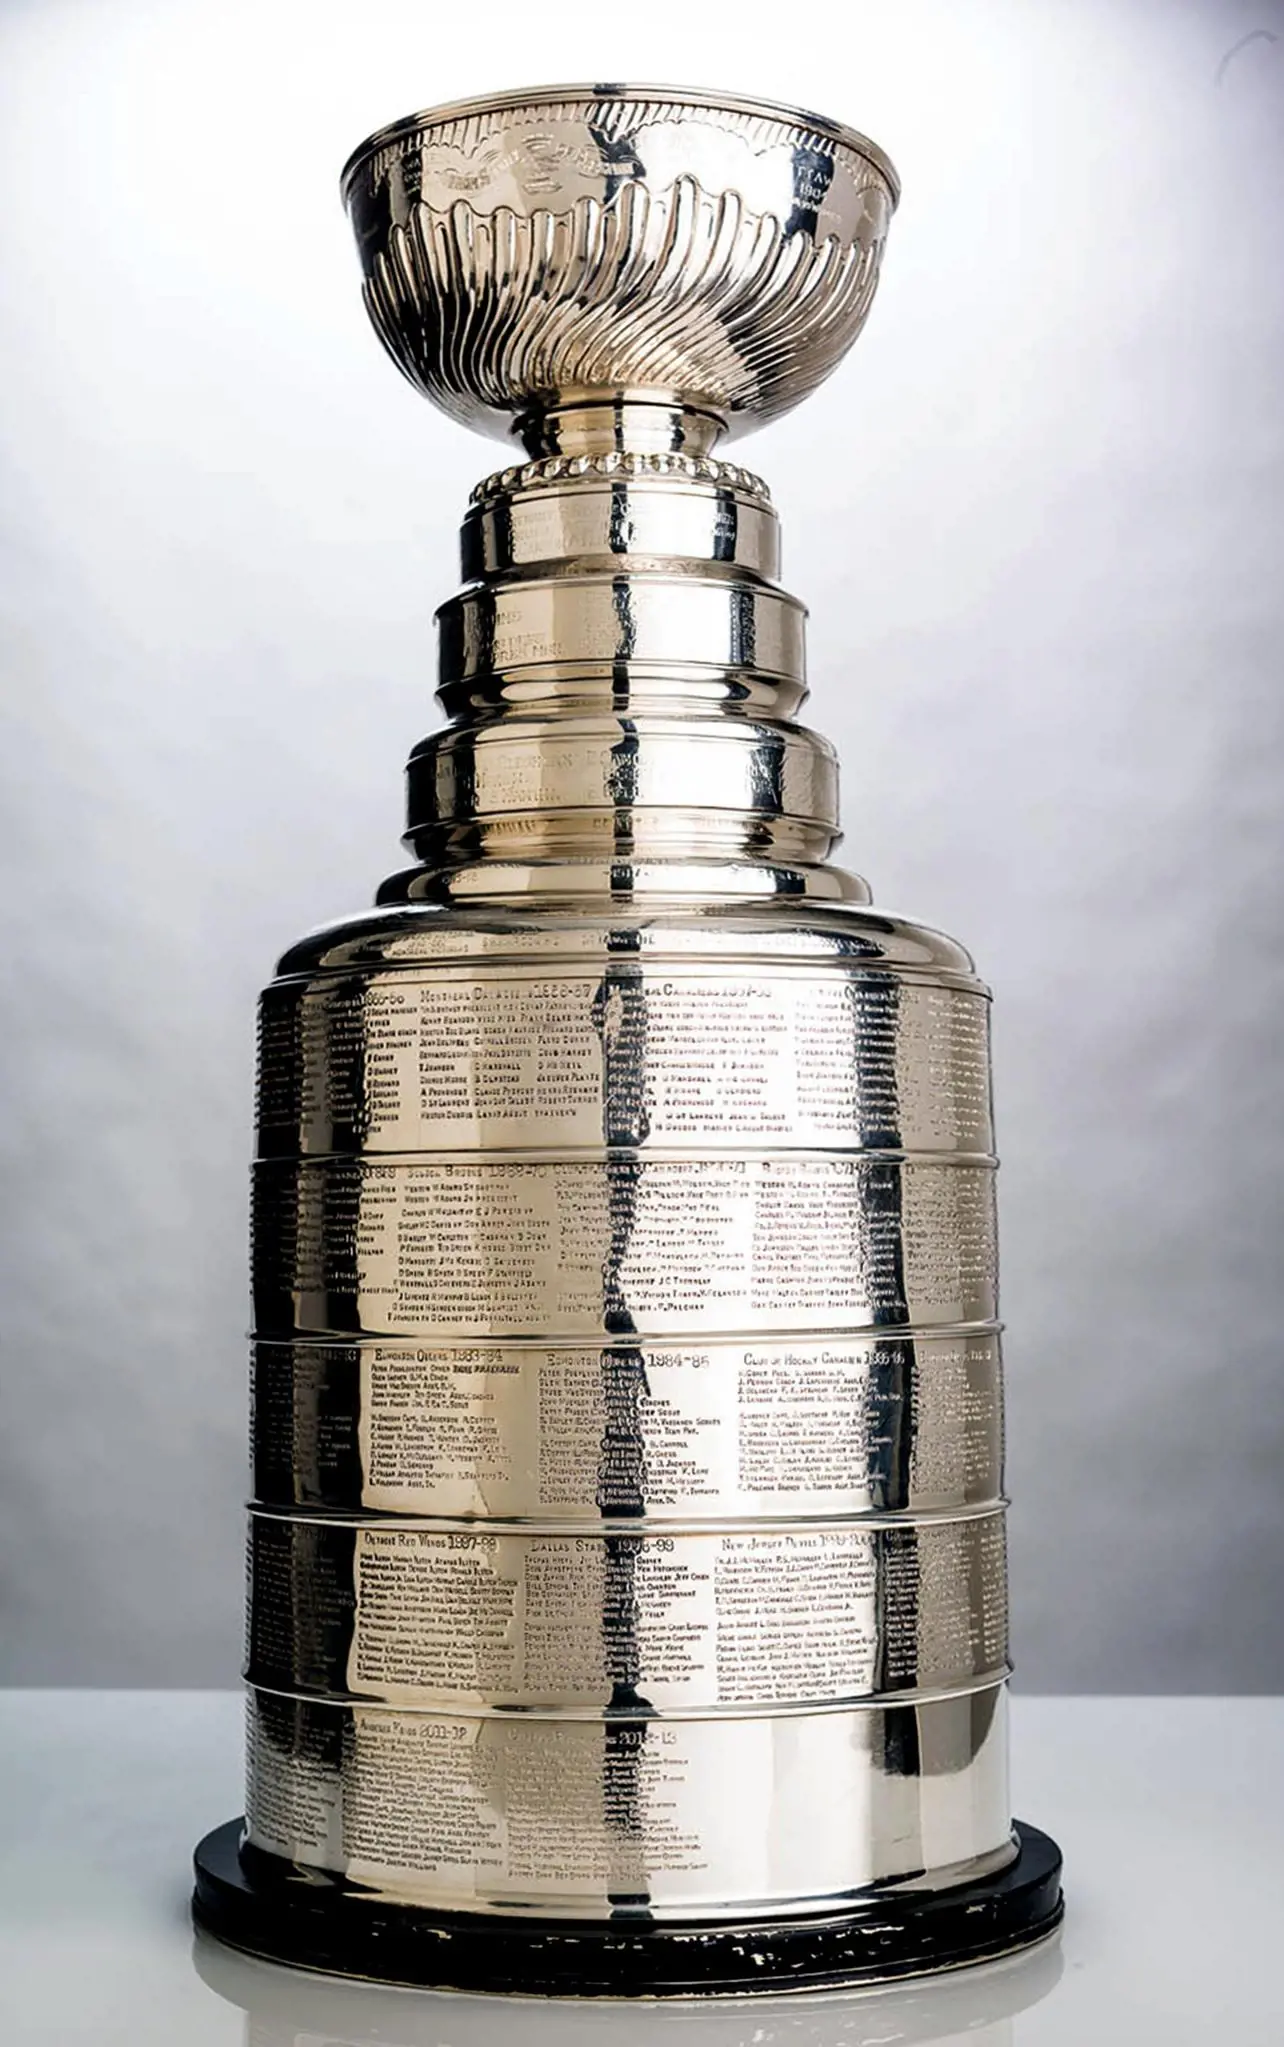 The Stanley Cup was donated by Sir Frederick Arthur Stanley, Lord Stanley of Preston in 1892 